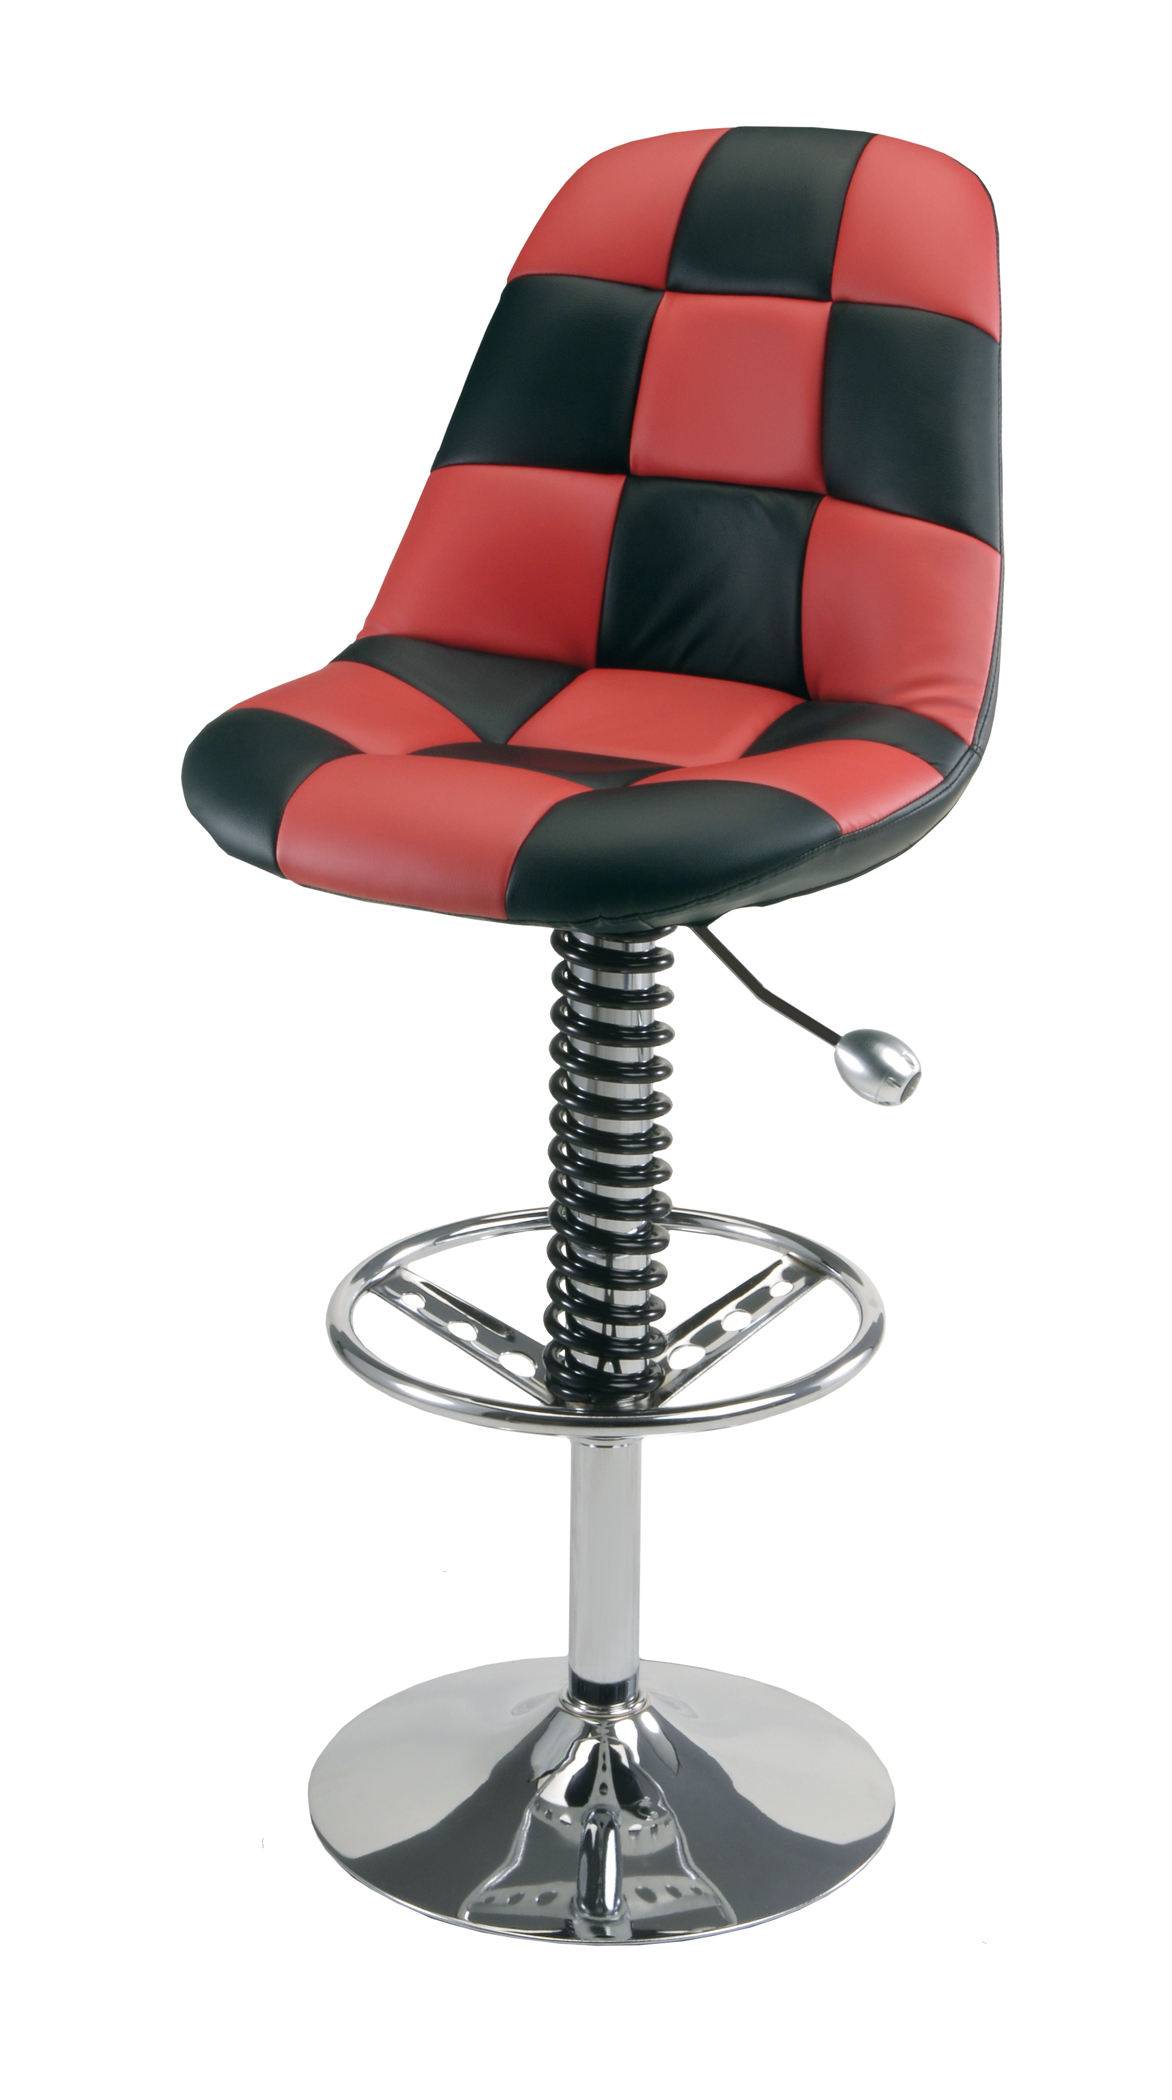 Intro-Tech Automotive, Pitstop Furniture, HR1300R Crew Chair Red, Bar Chair